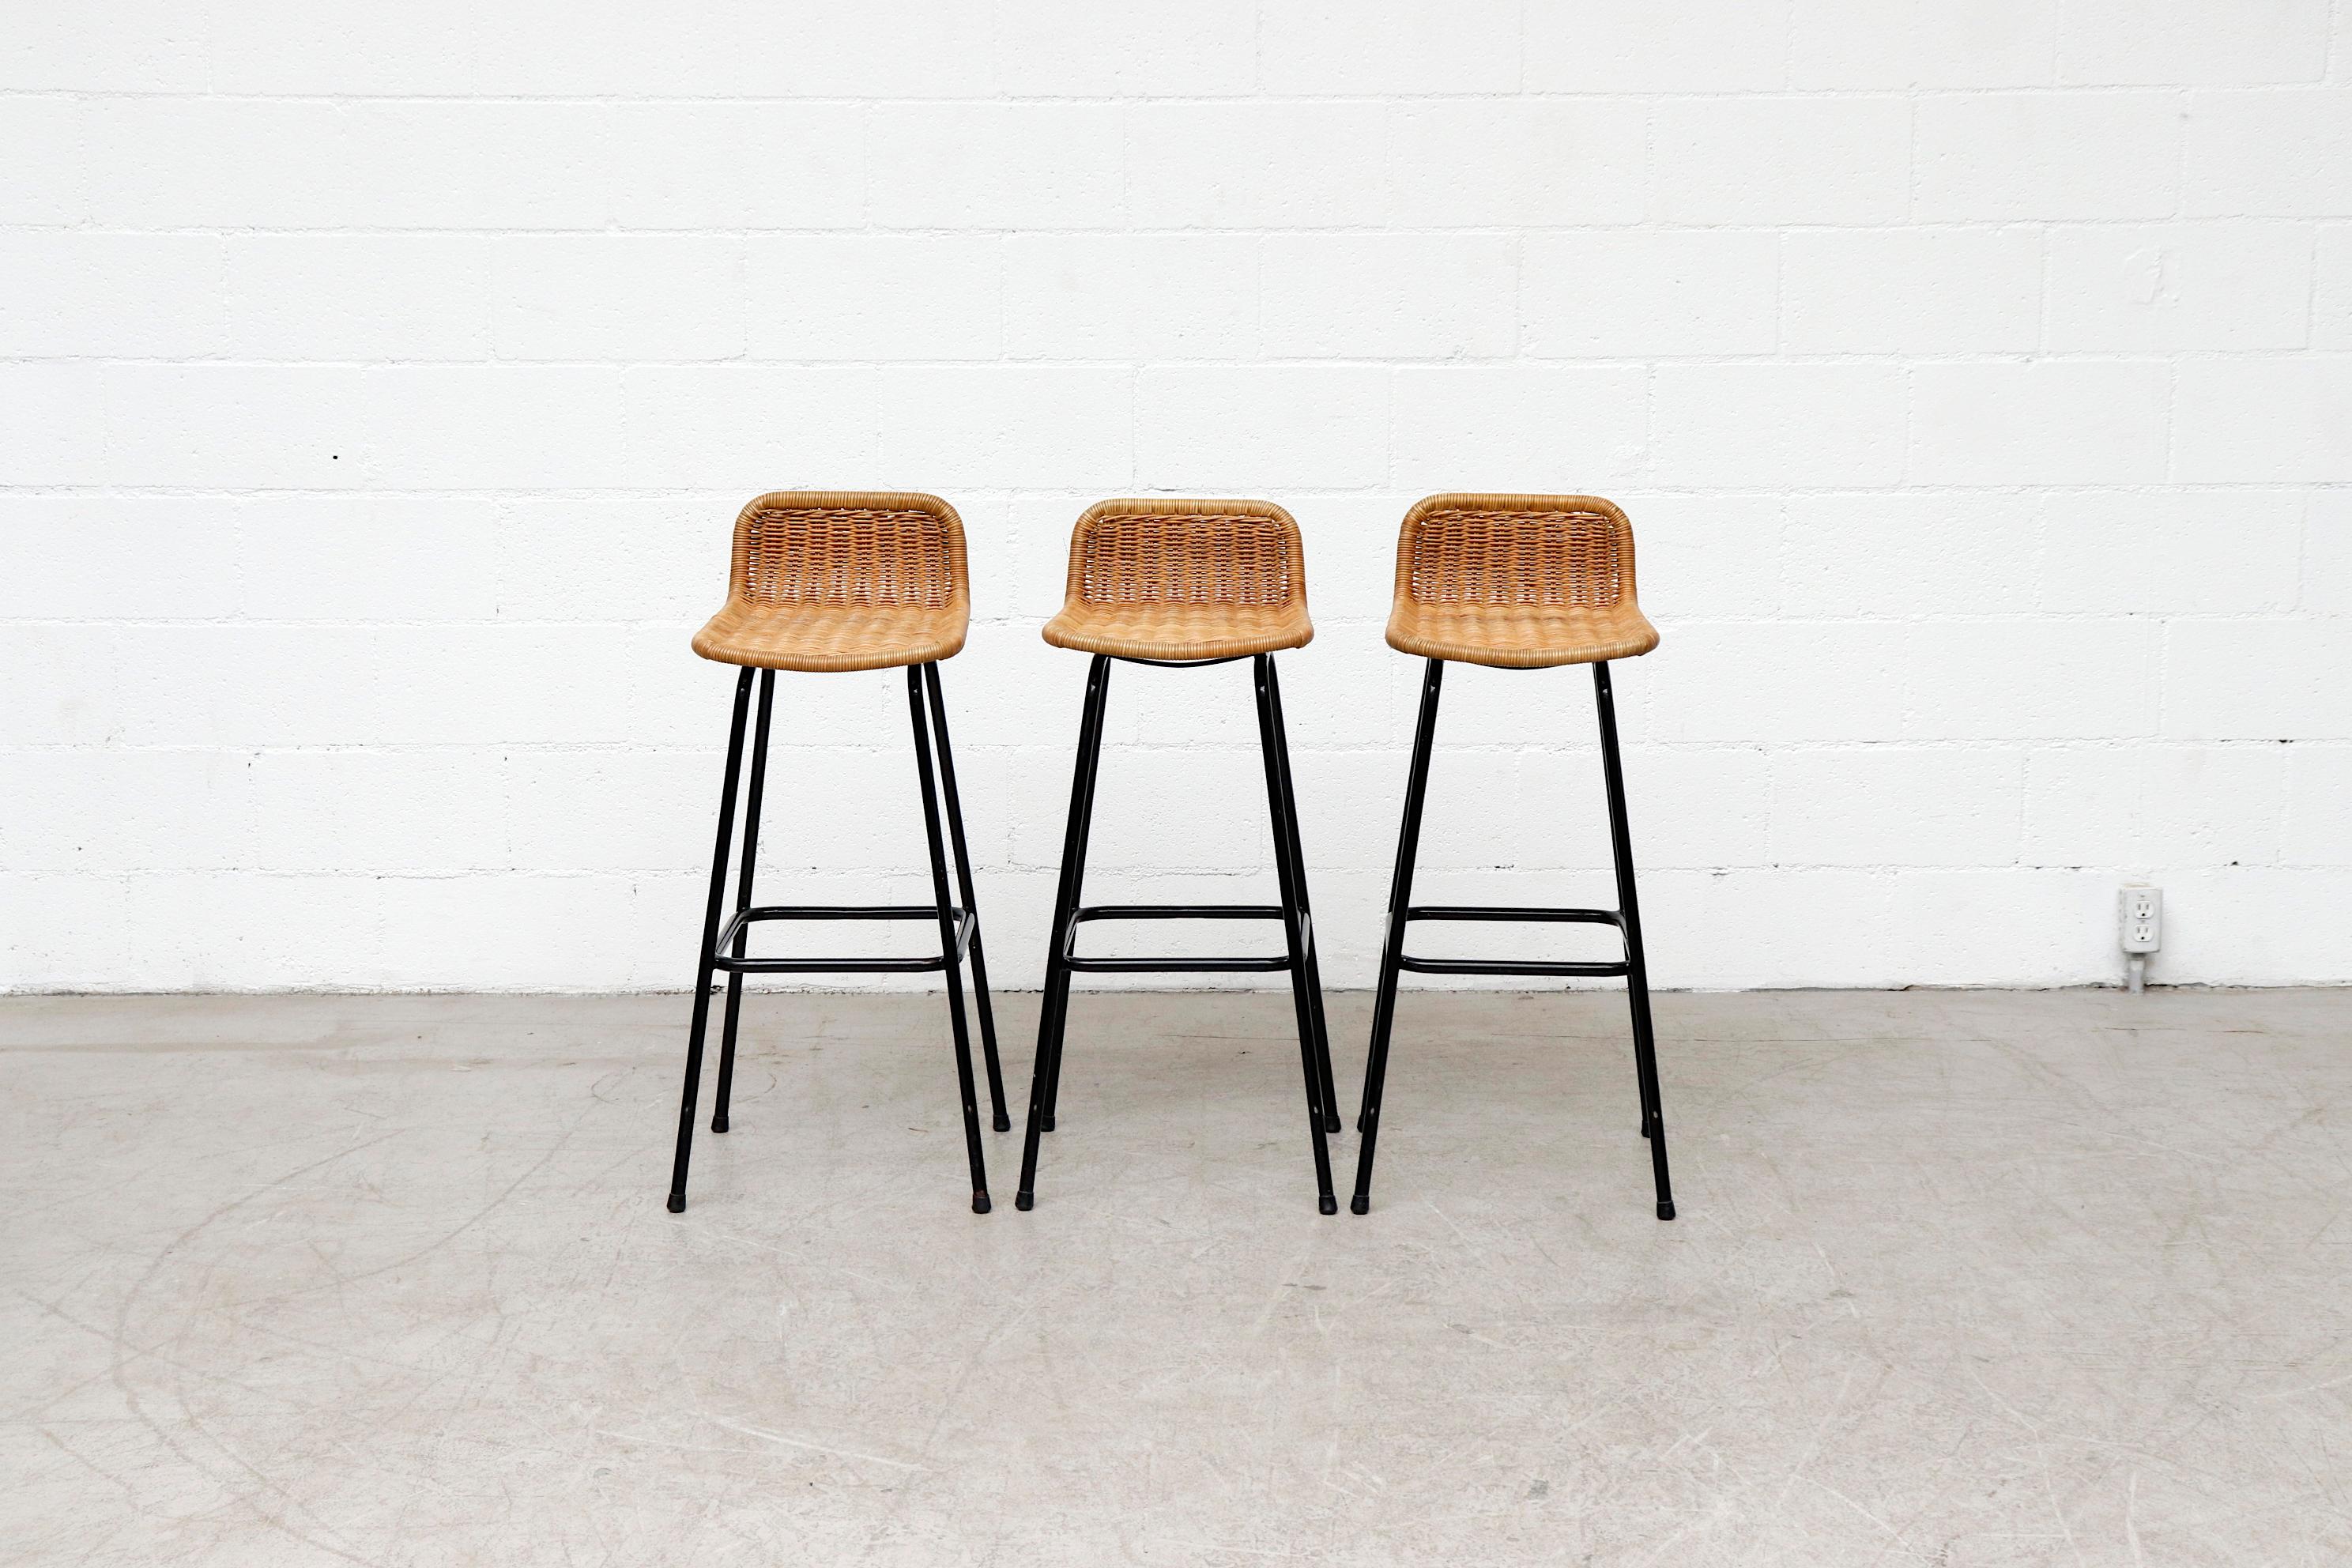 Set of 3 Charlotte Perriand style midcentury bar stools with low rounded rattan seat and back with black enameled tubular frame in original condition. 30